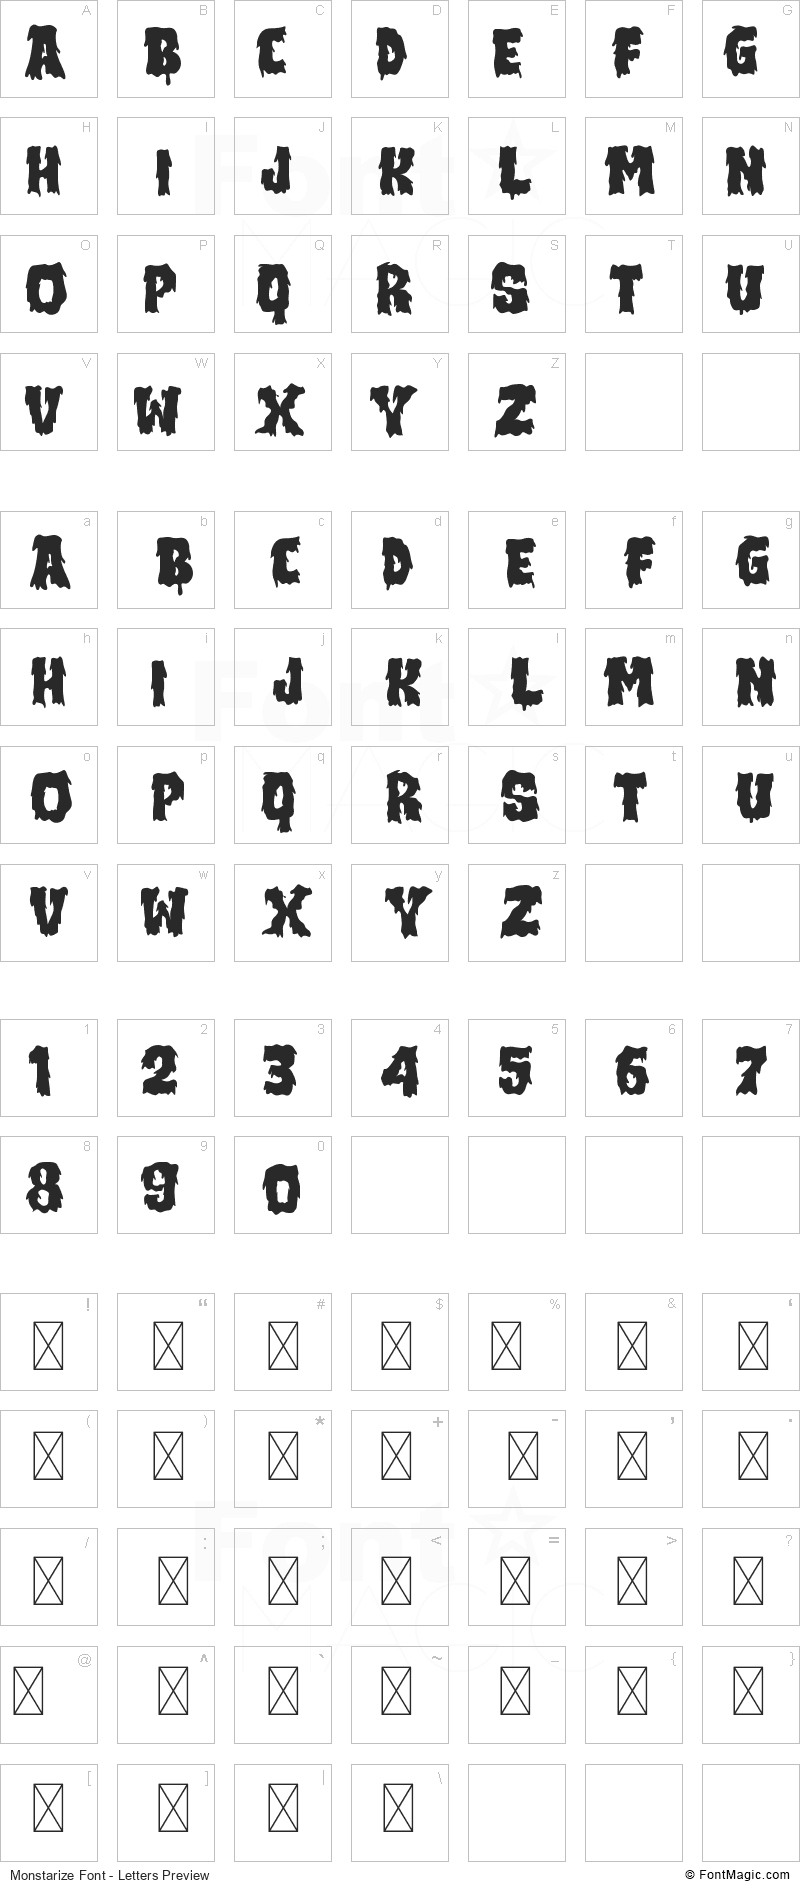 Monstarize Font - All Latters Preview Chart